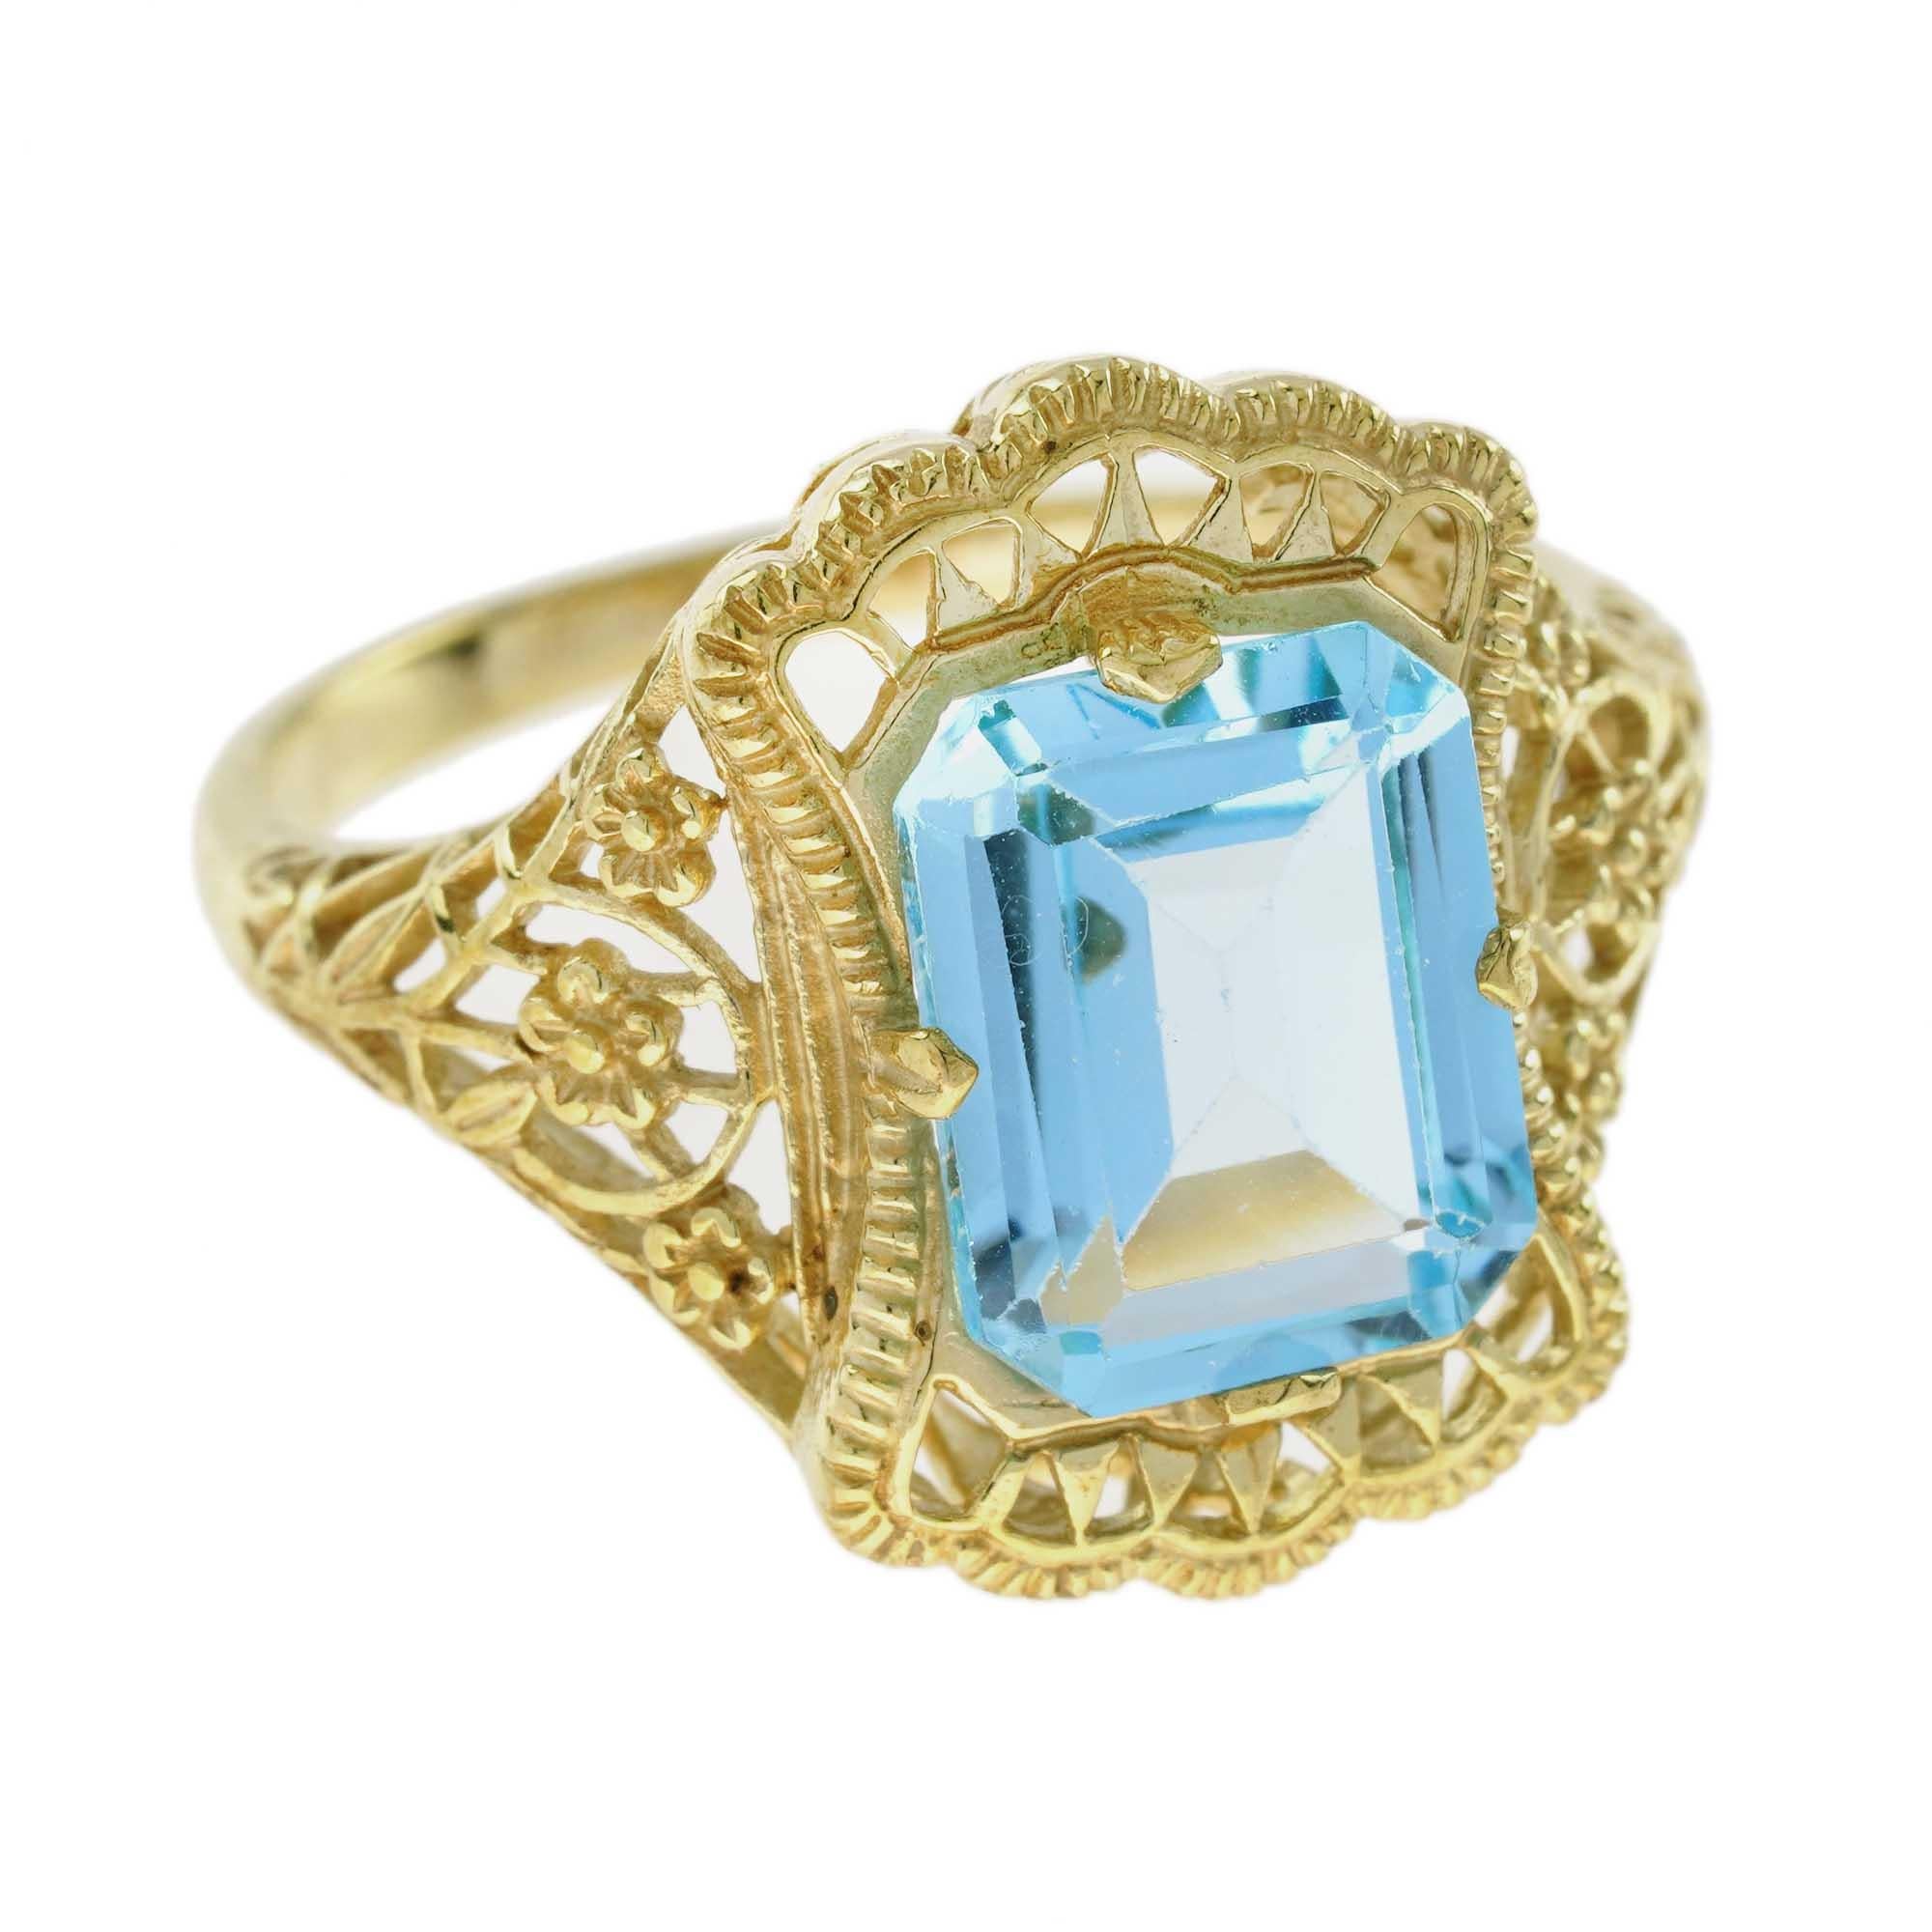 For Sale:  4.50 Ct. Natural Blue Topaz Vintage Style Filigree Ring in Solid 9K Yellow Gold